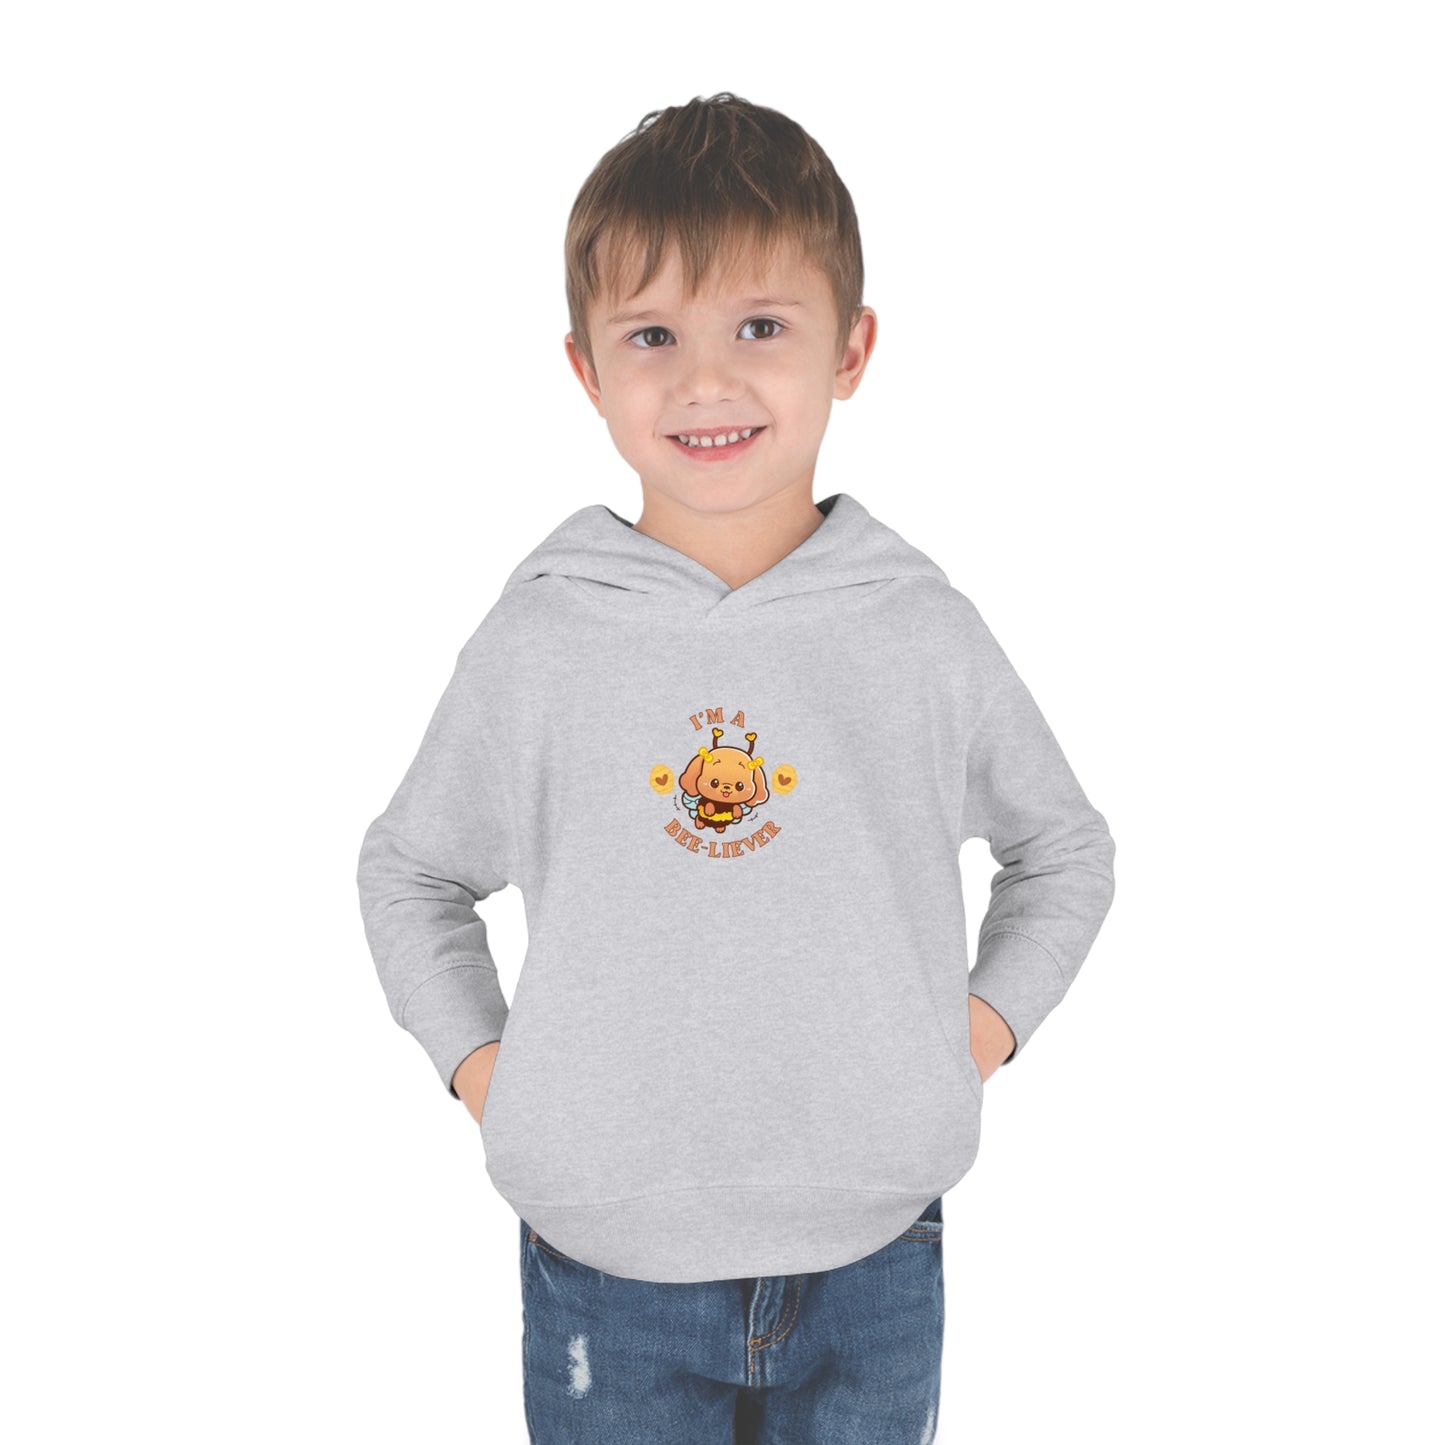 Believer Pullover Fleece Children's Hoodie, Christian Pullover for Kids, Jesus Hoodie, Toddler & Youth Faith Apparel